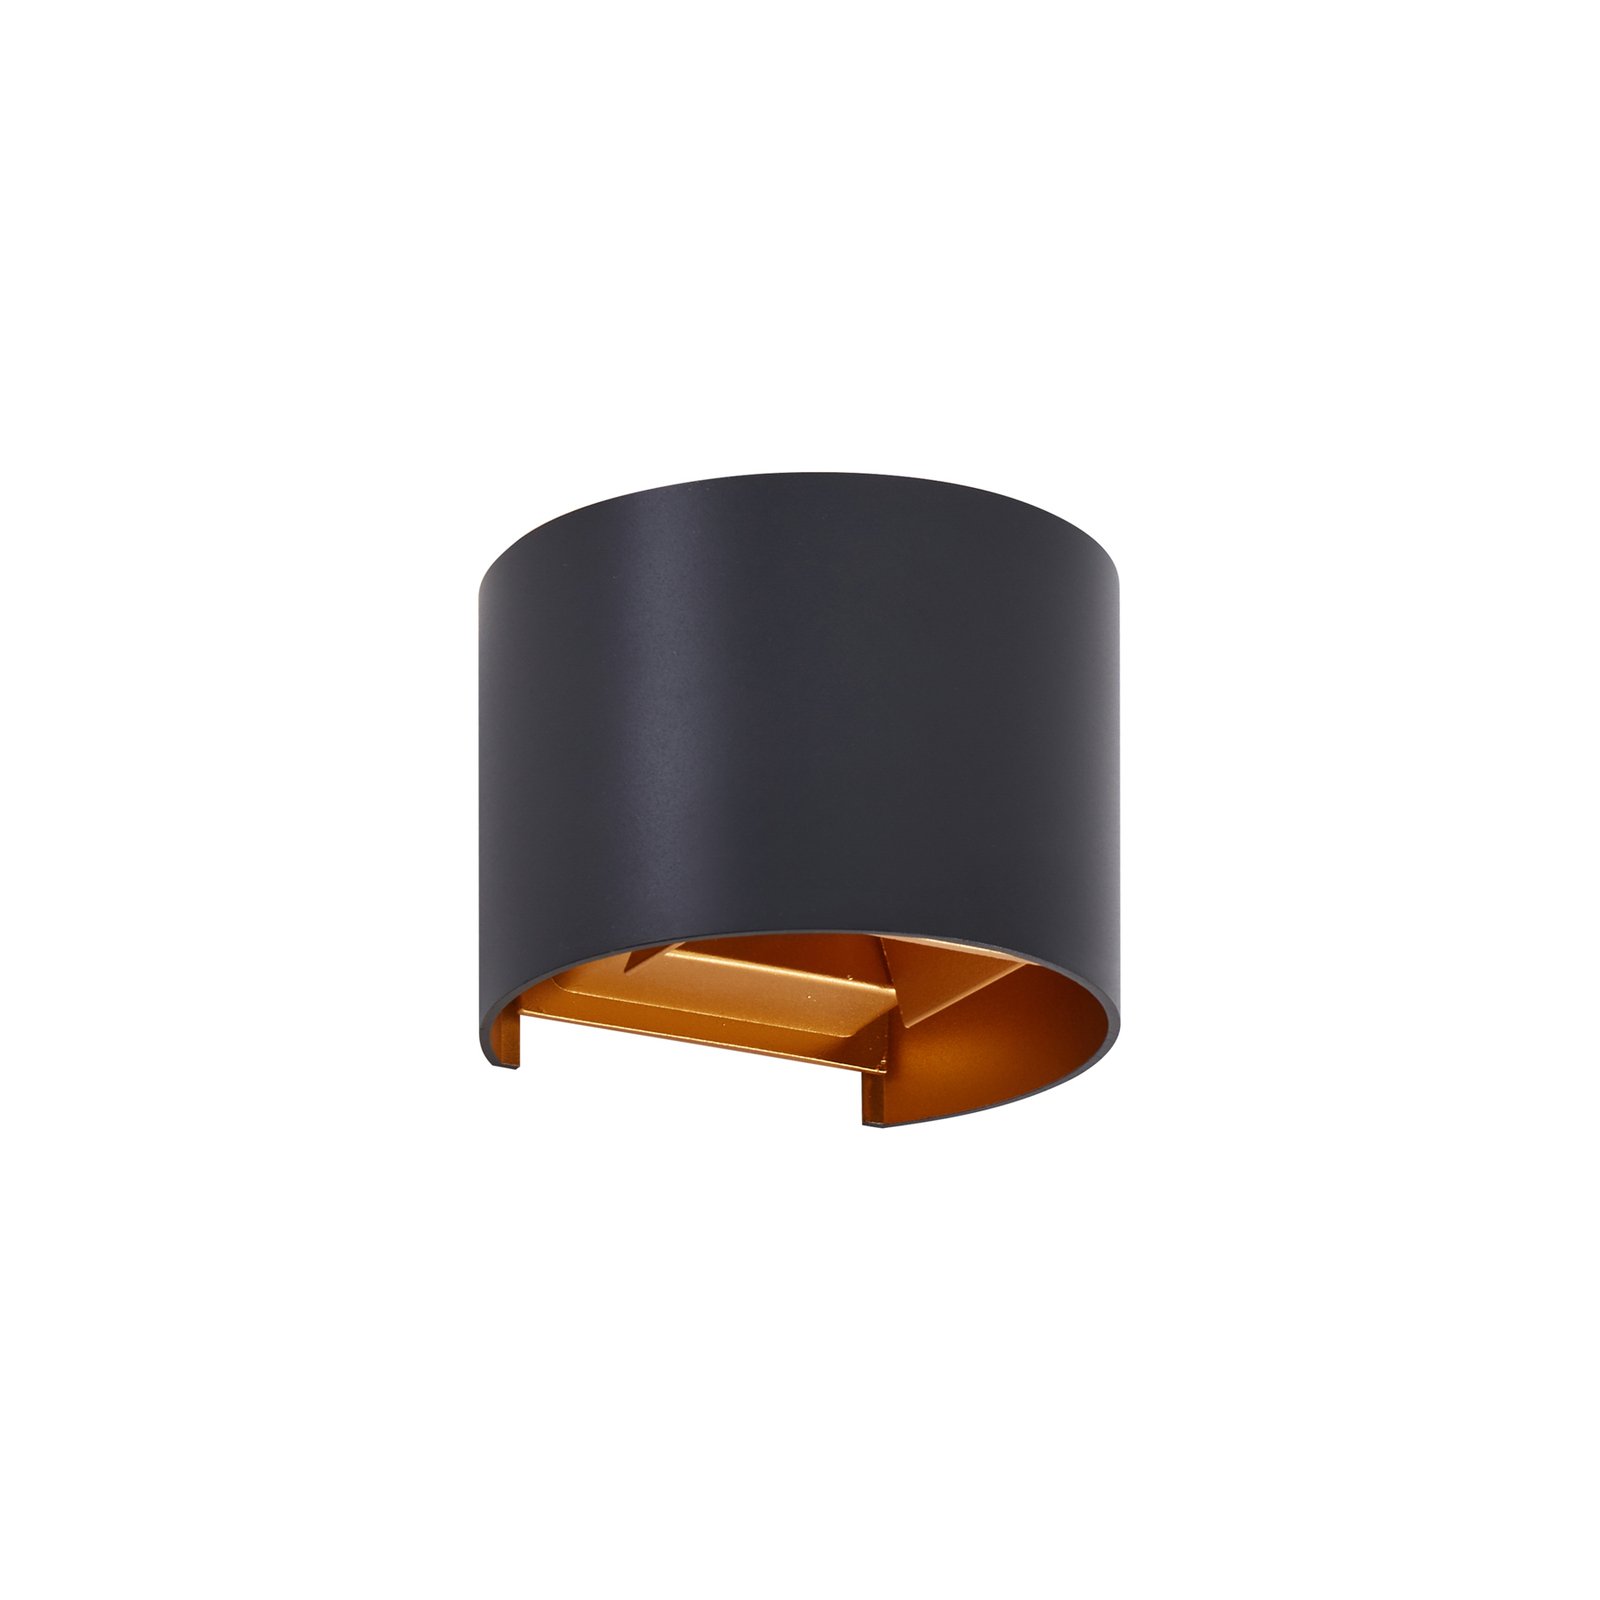 Lindby LED outdoor wall light Nivar, round, black/gold-coloured